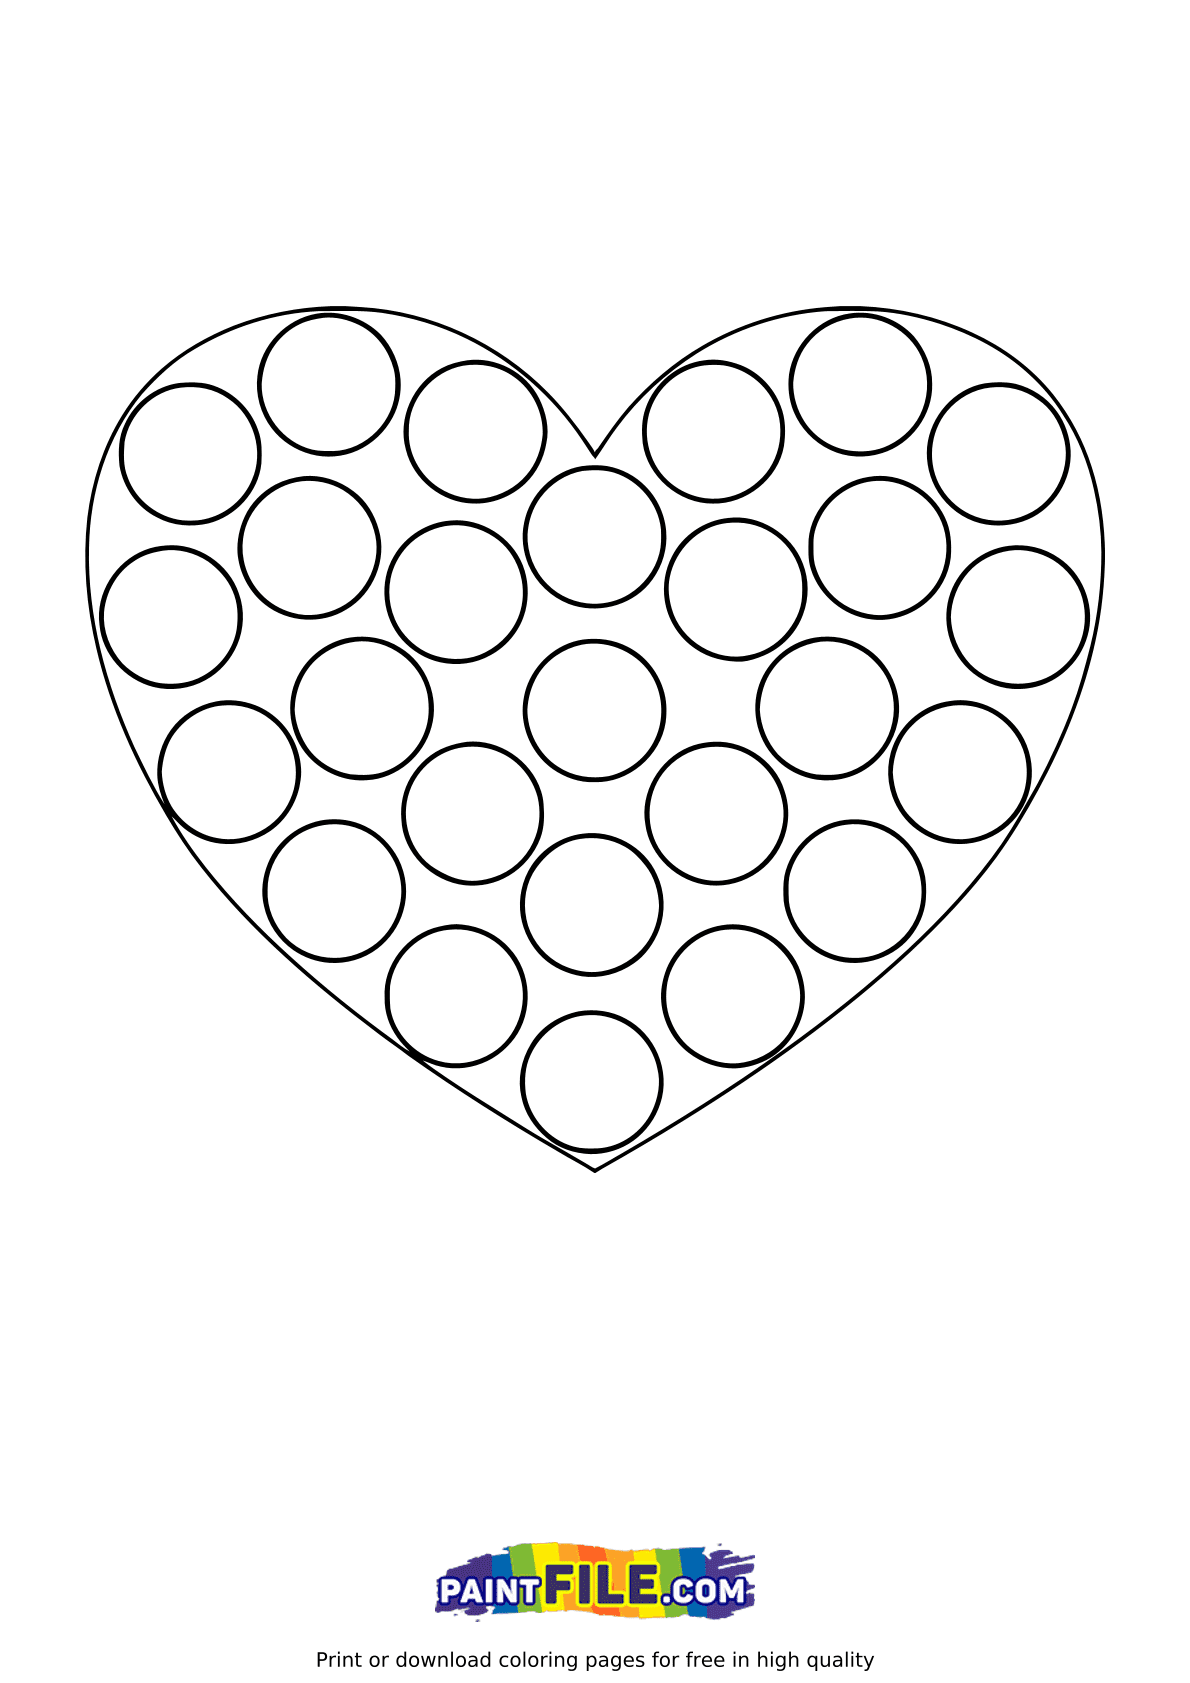 Pop it Heart Coloring Page